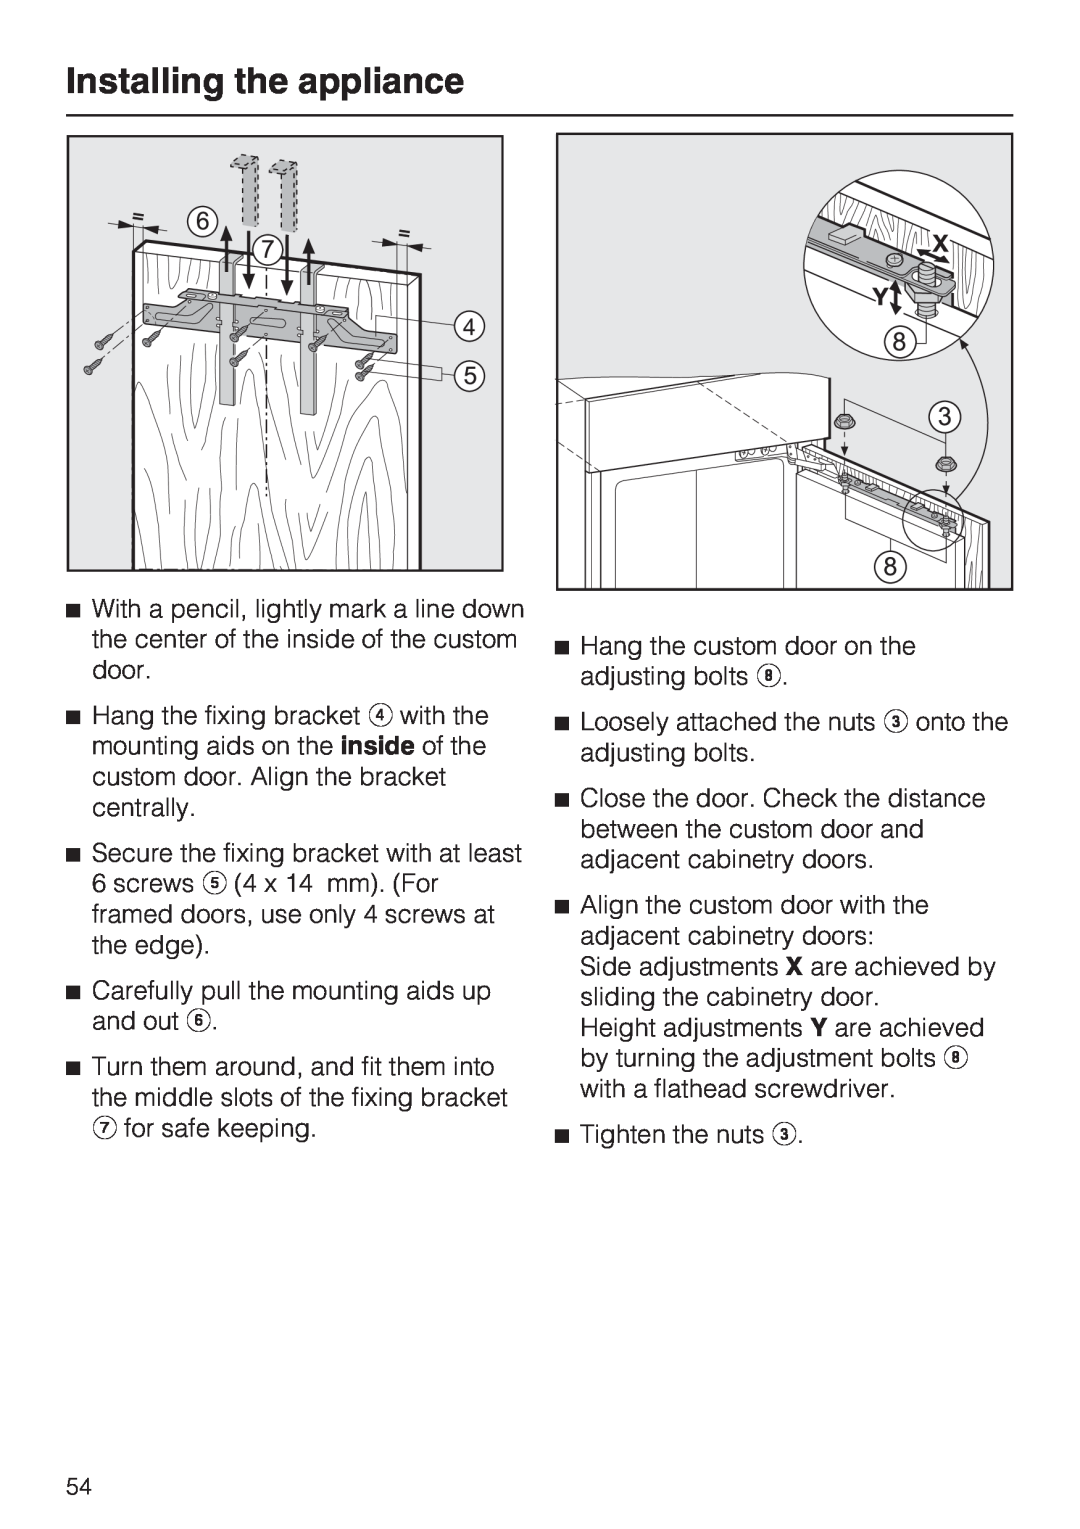 Miele KFN 9755 IDE installation instructions Installing the appliance, Carefully pull the mounting aids up and out f 